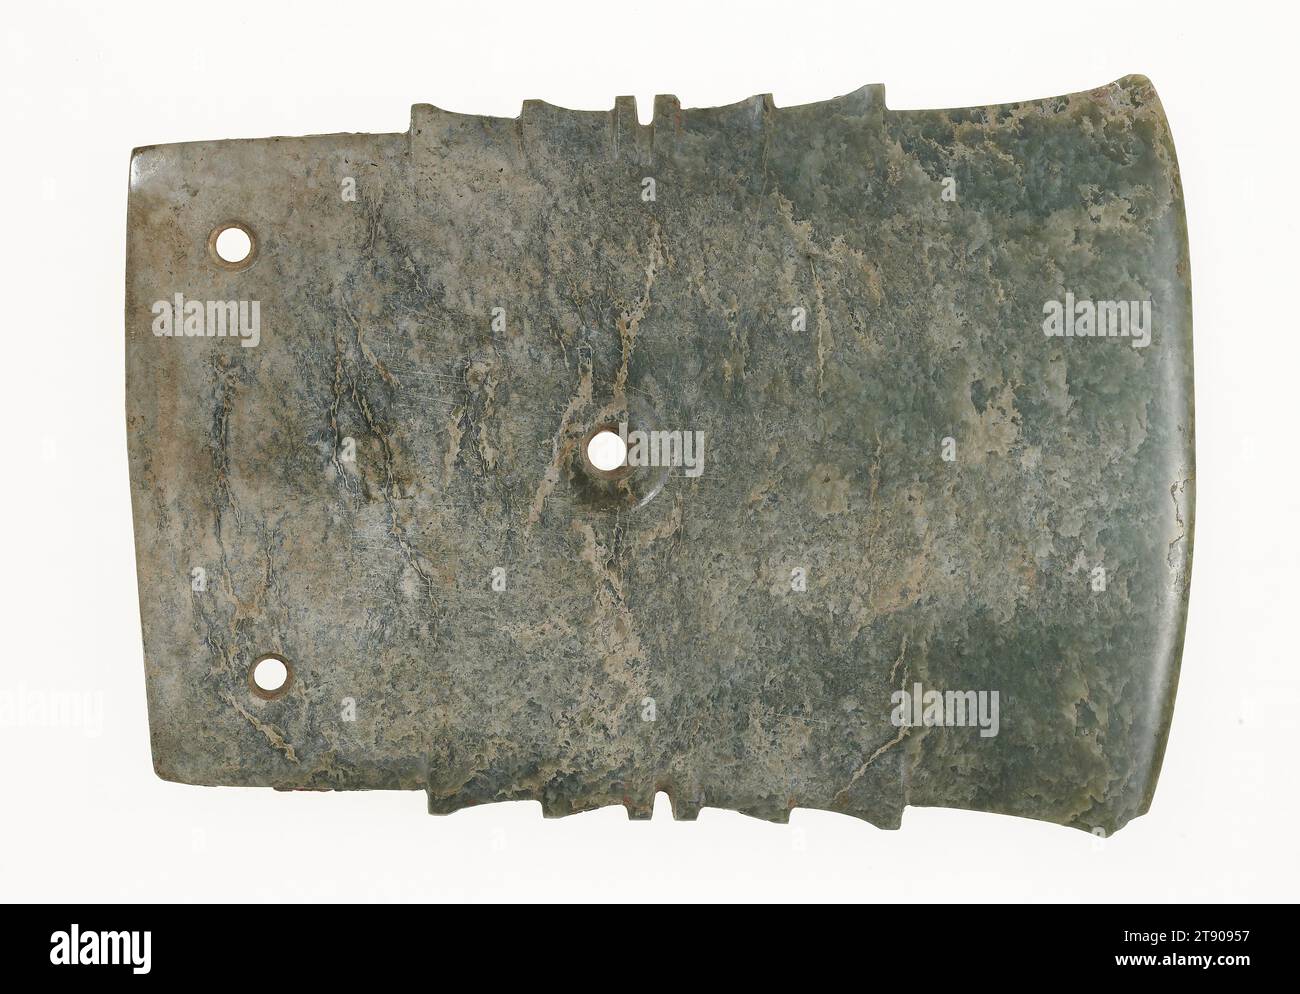 Flat Ji Axe, 1600-1100 BCE, 6 15/16 x 4 7/8 x 3/8 in. (17.62 x 12.38 x 0.95 cm), Mottled grey-green jade with traces of red pigment, China, 16th-11th century BCE Stock Photo